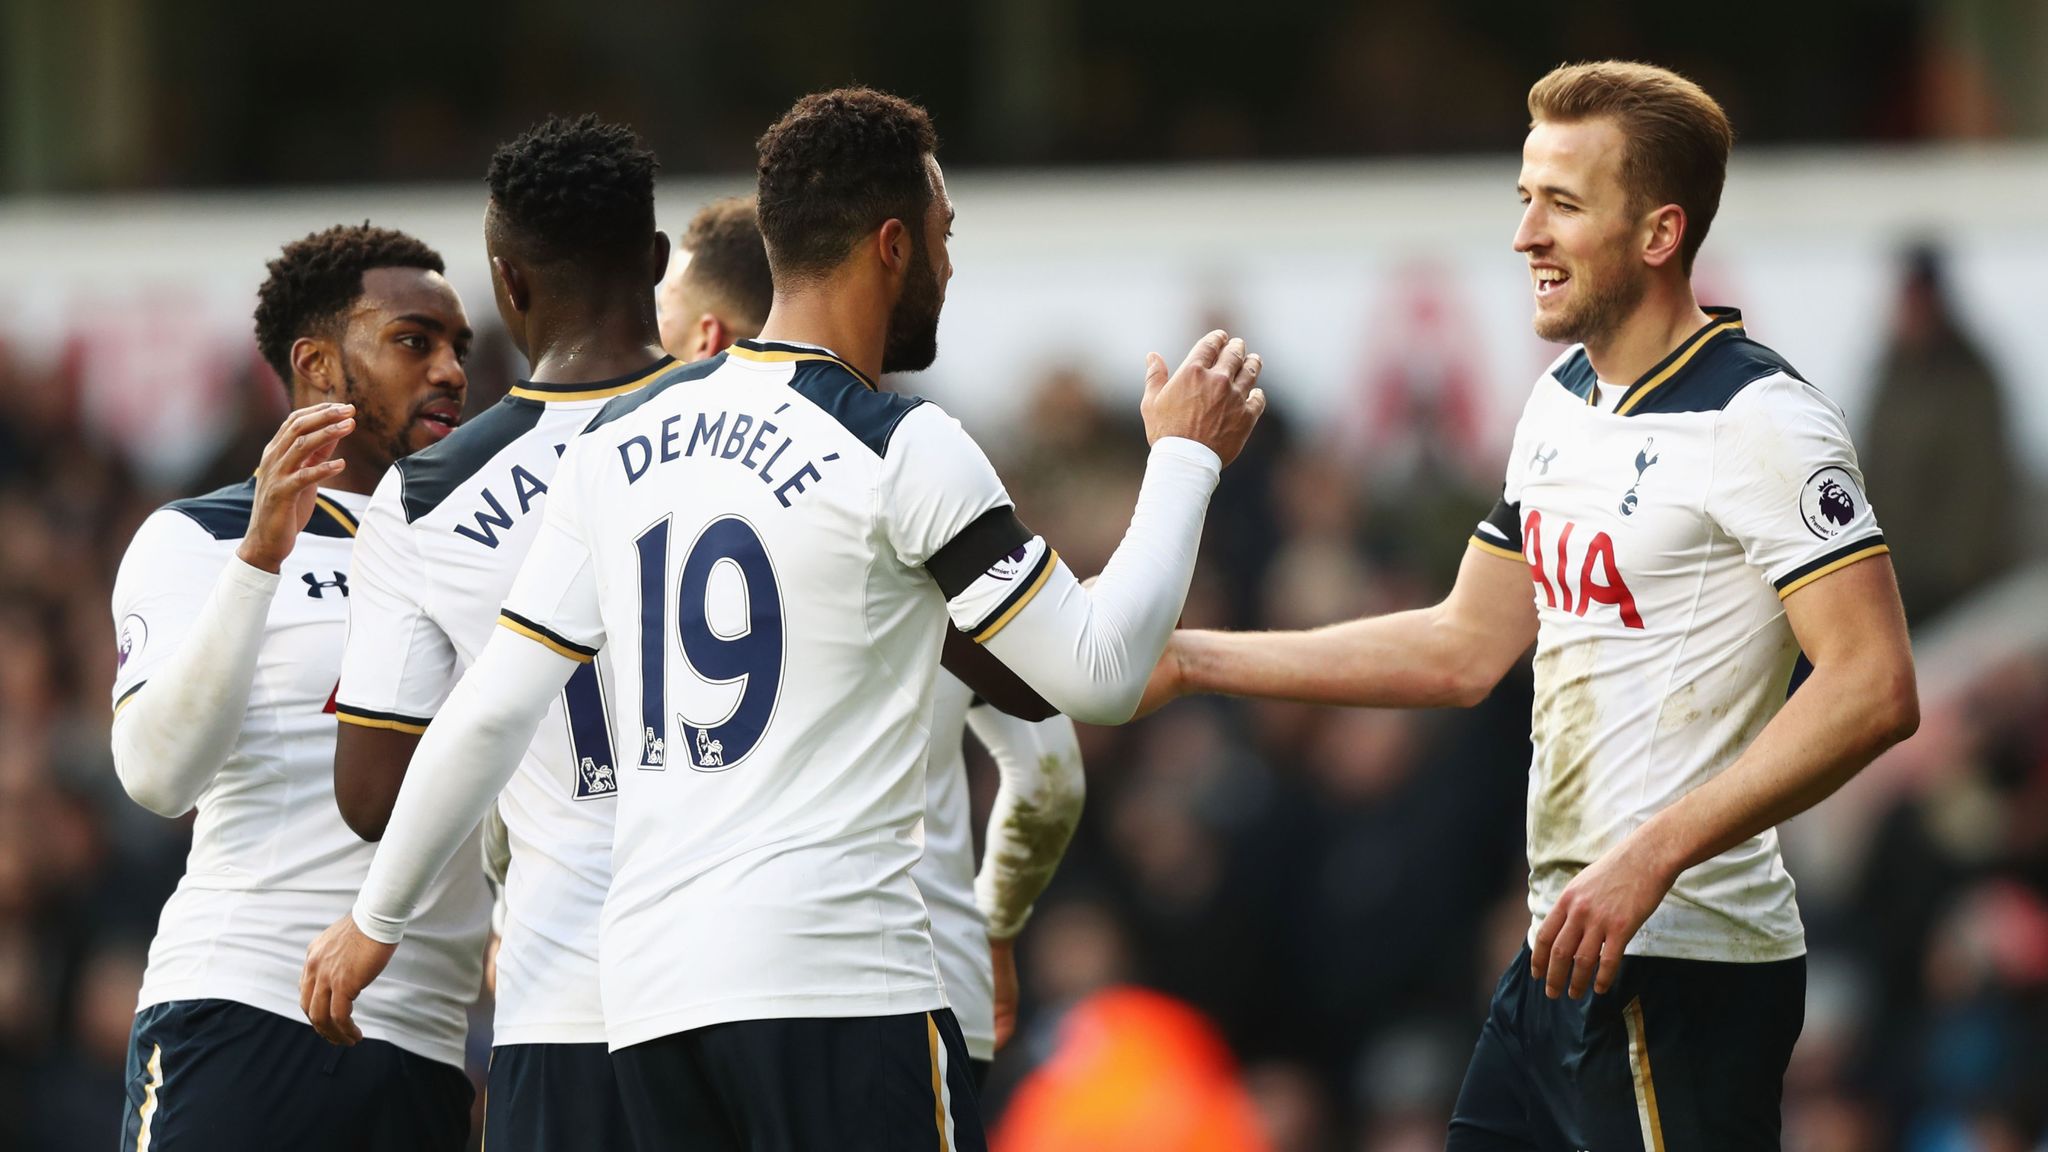 THE 60 SECOND SPURS NEWS UPDATE: Juve Interested in Tottenham